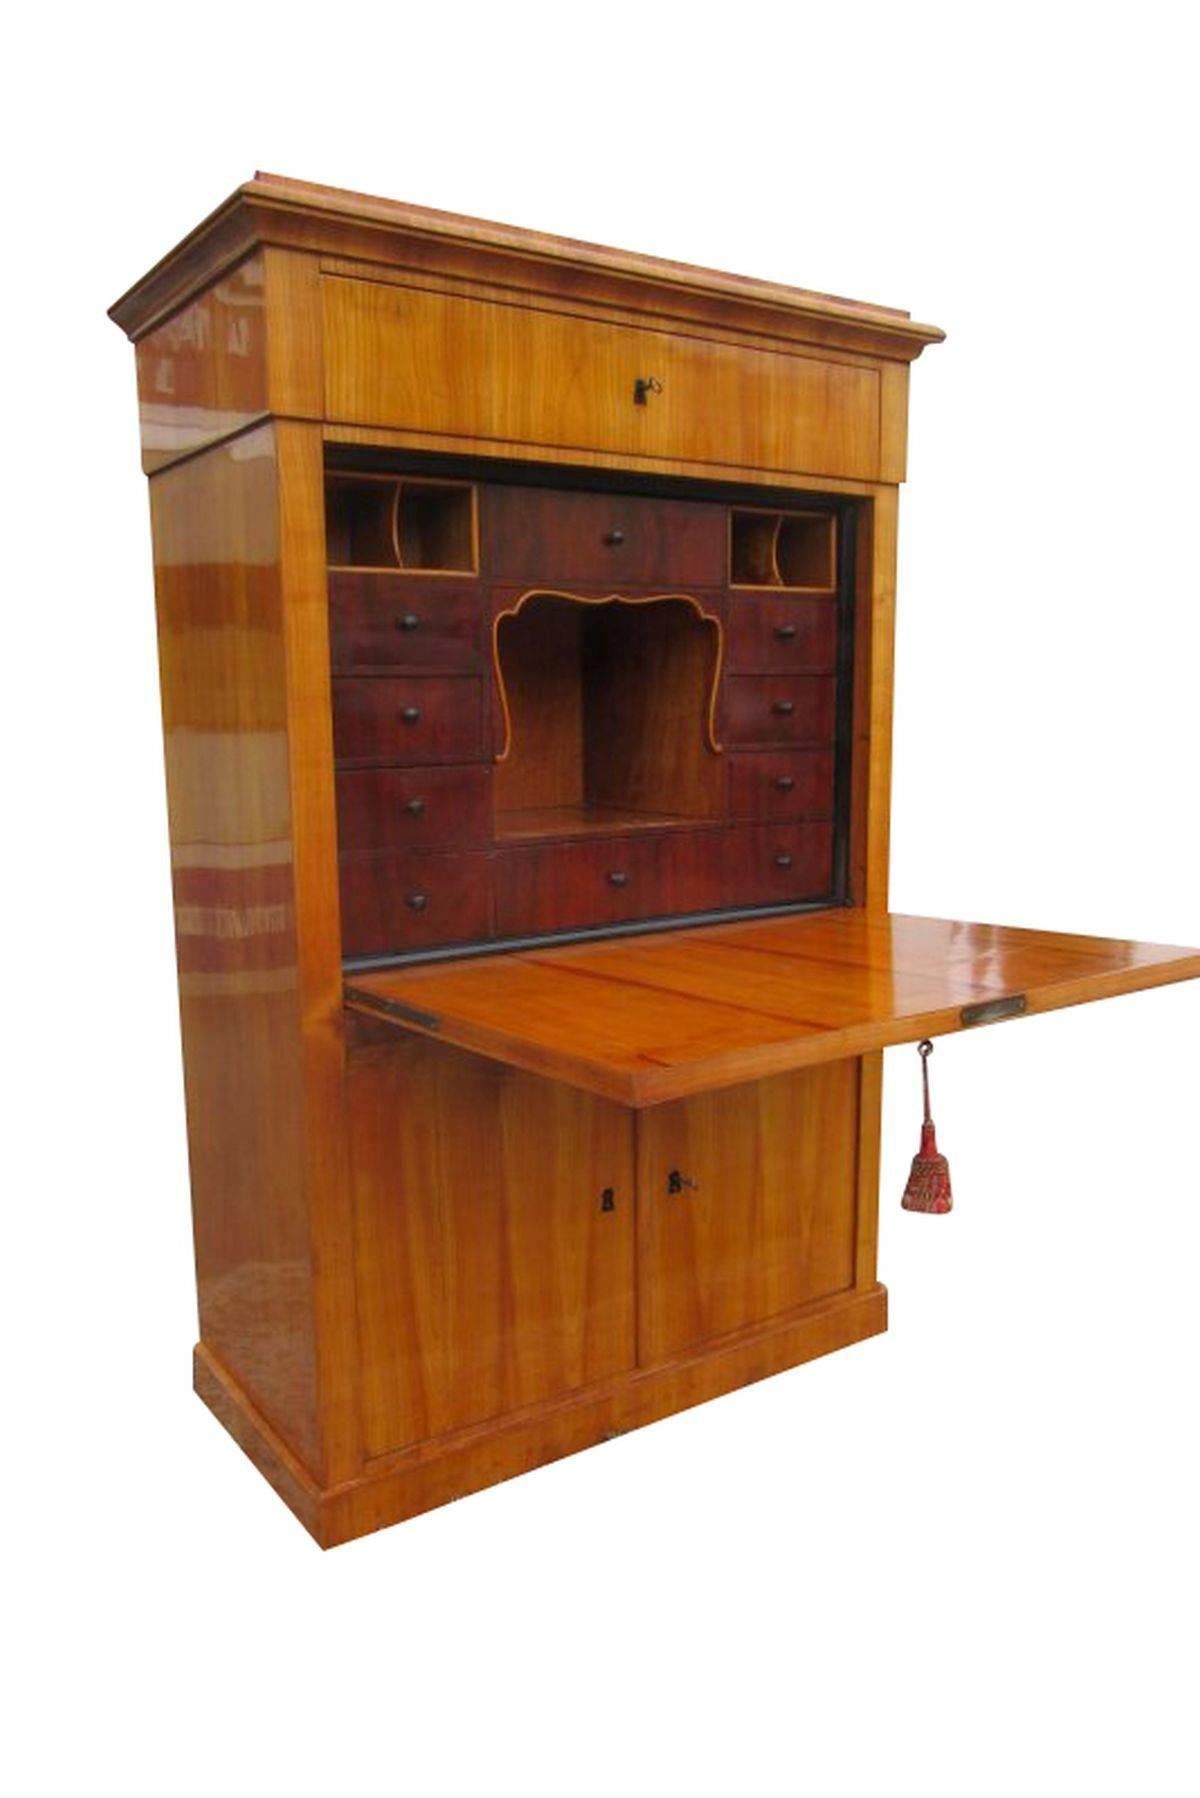 A great Secretary from the Biedermeier period. The piece offers a great storage room with many drawers. Unfolding the write flap reveals more drawers in a dark brown color. The ornaments inside mixed with the color play is a real sight. This